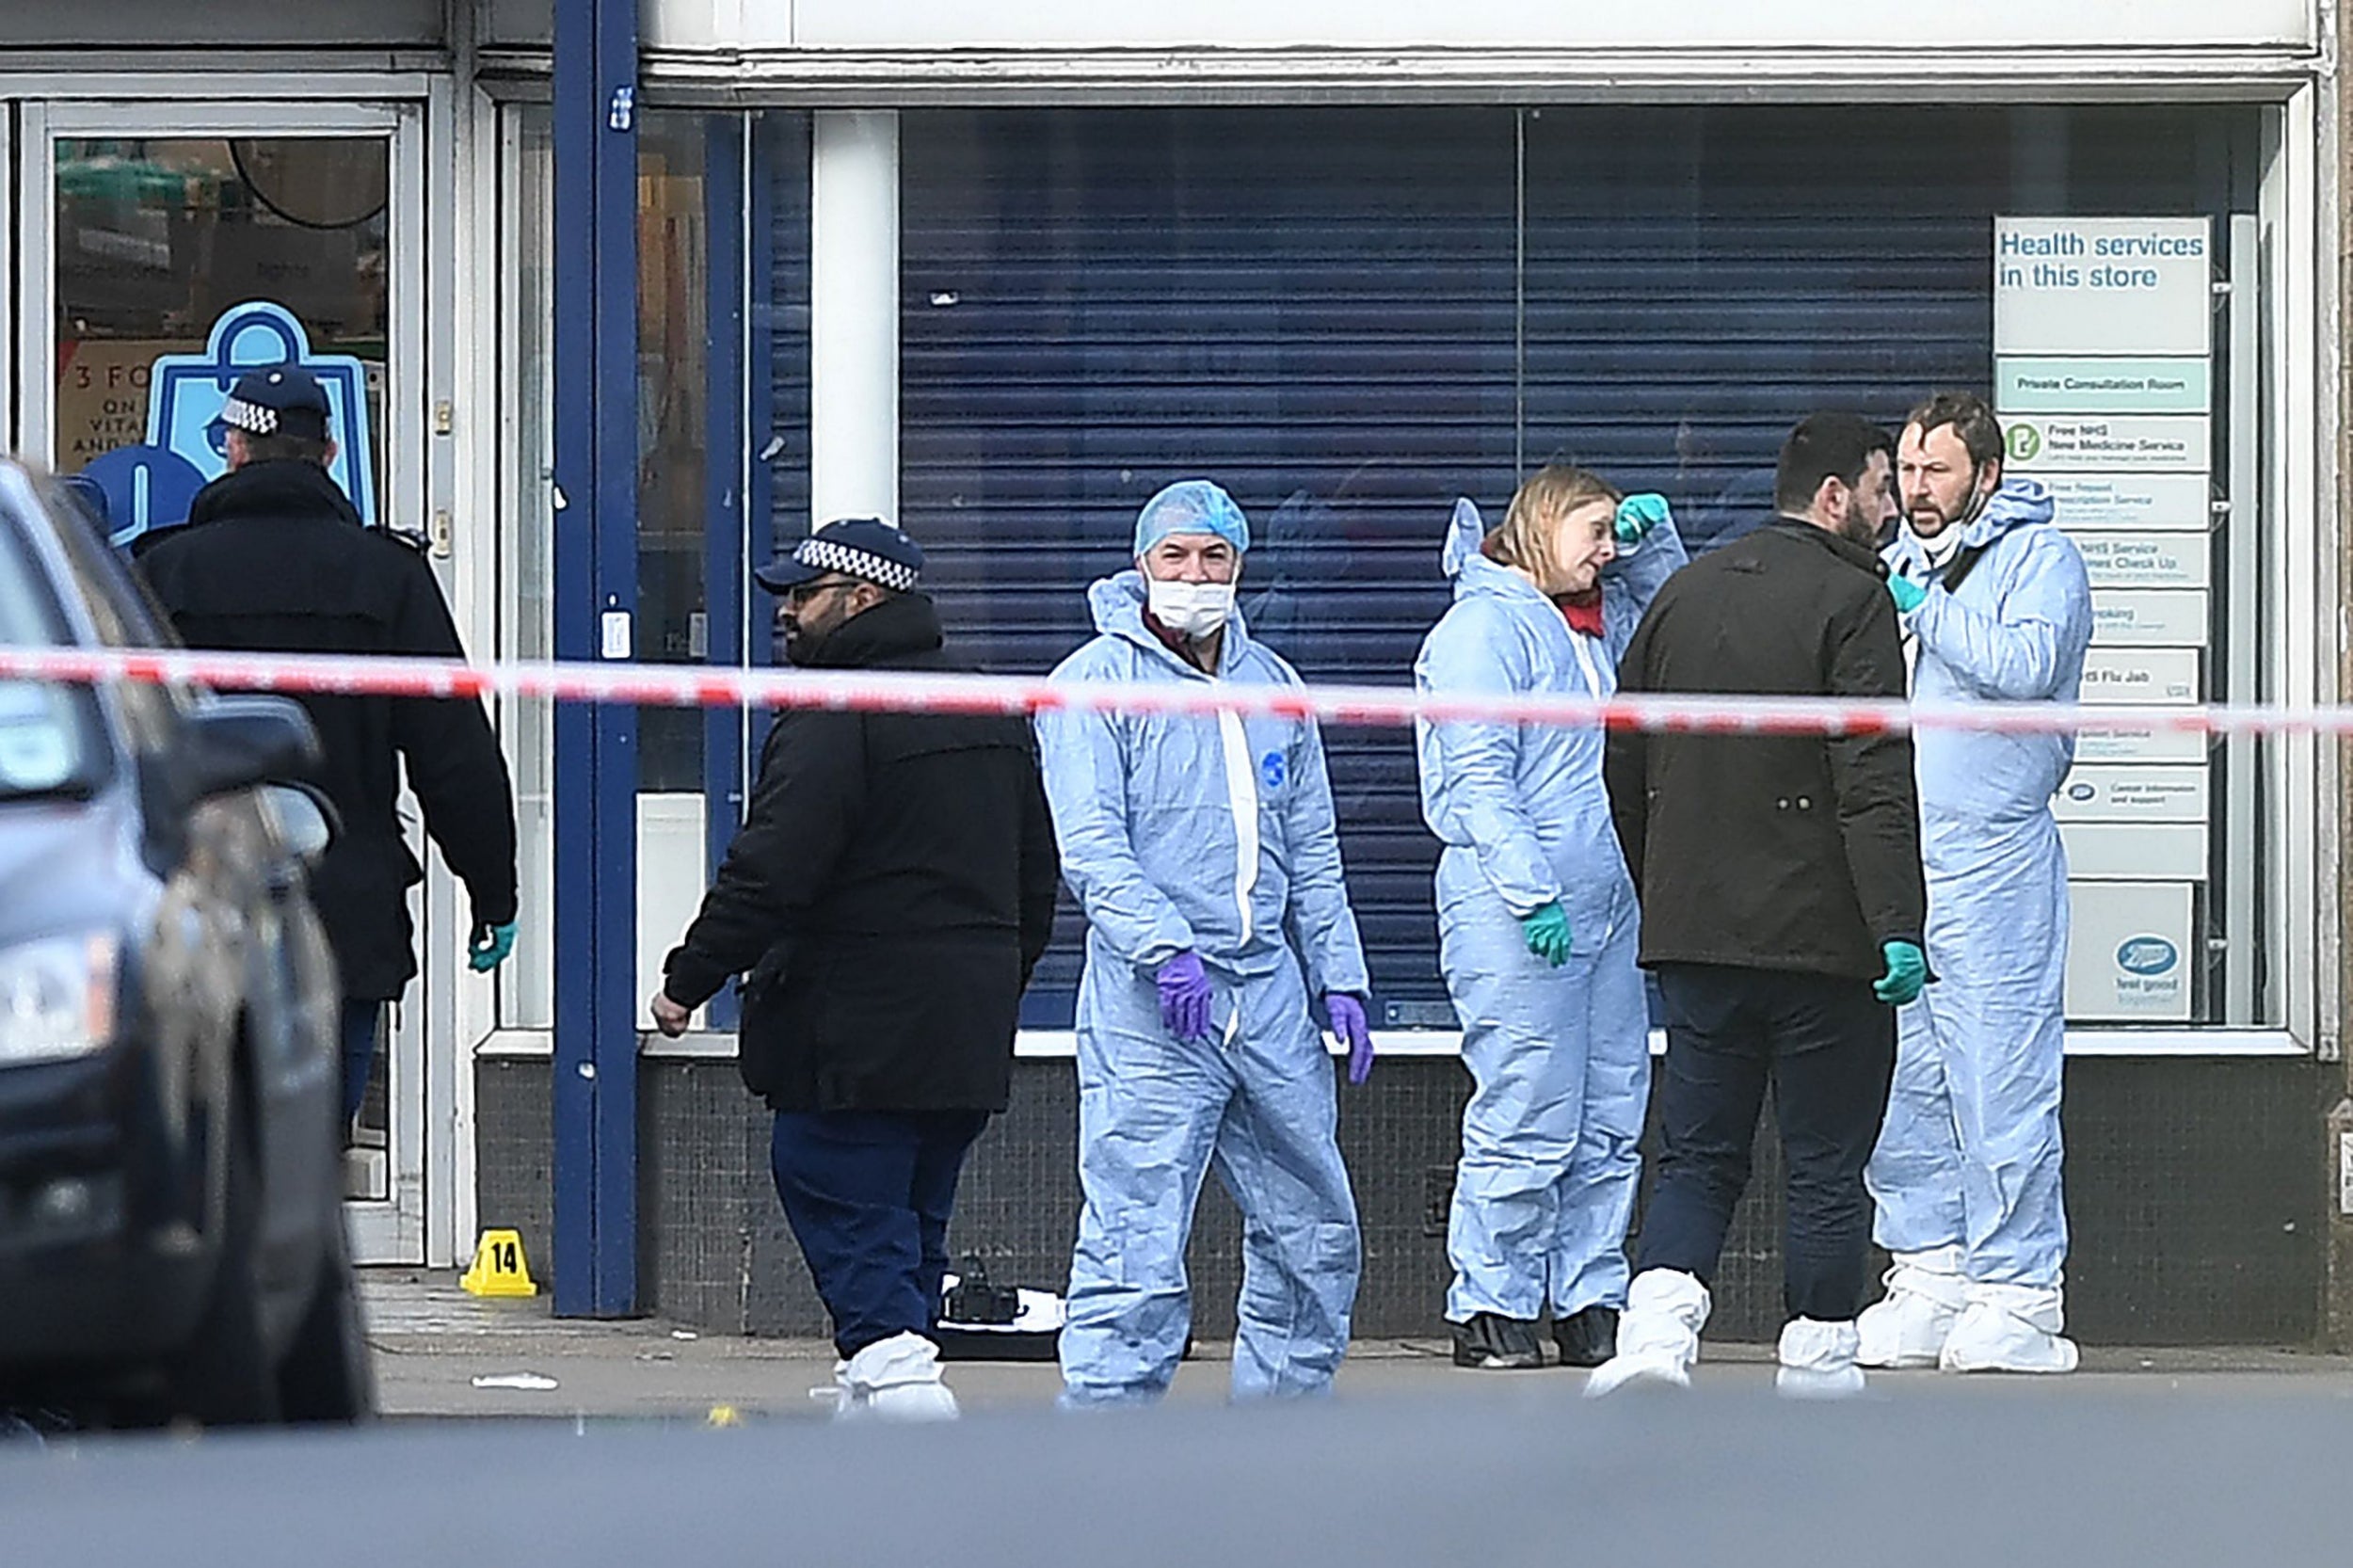 Police forensic officers on Streatham High Road in south London after Sudesh Amman stabbed two bystanders in February